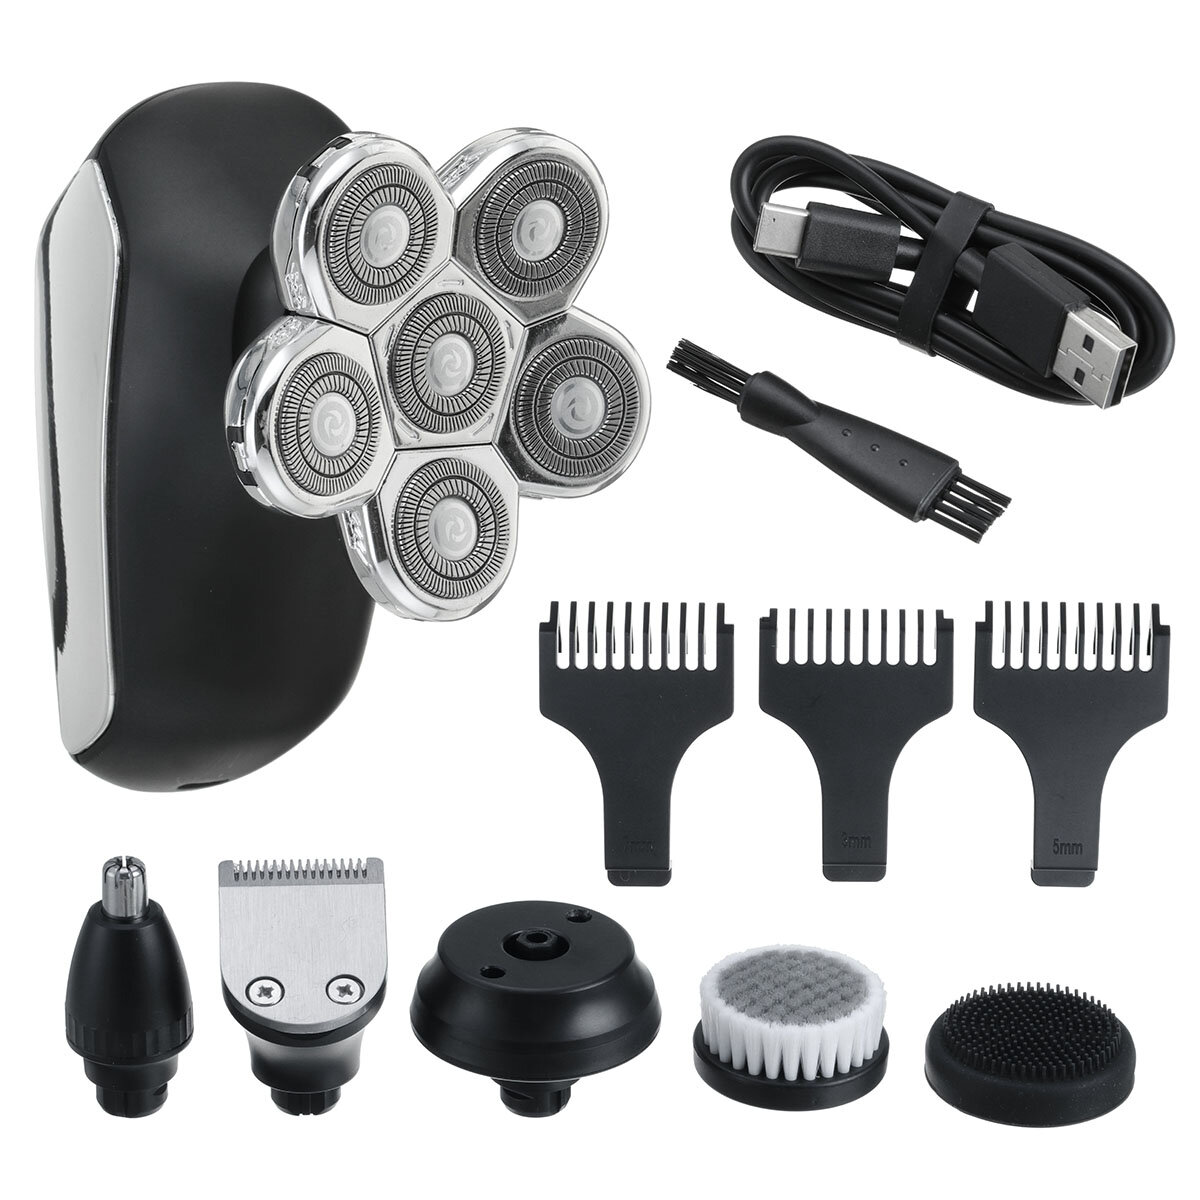 

5 IN 1 6D Rotary Electric Shaver USB Rechargeable Bald Head Shaver Beard Trimmer IPX7 Waterproof